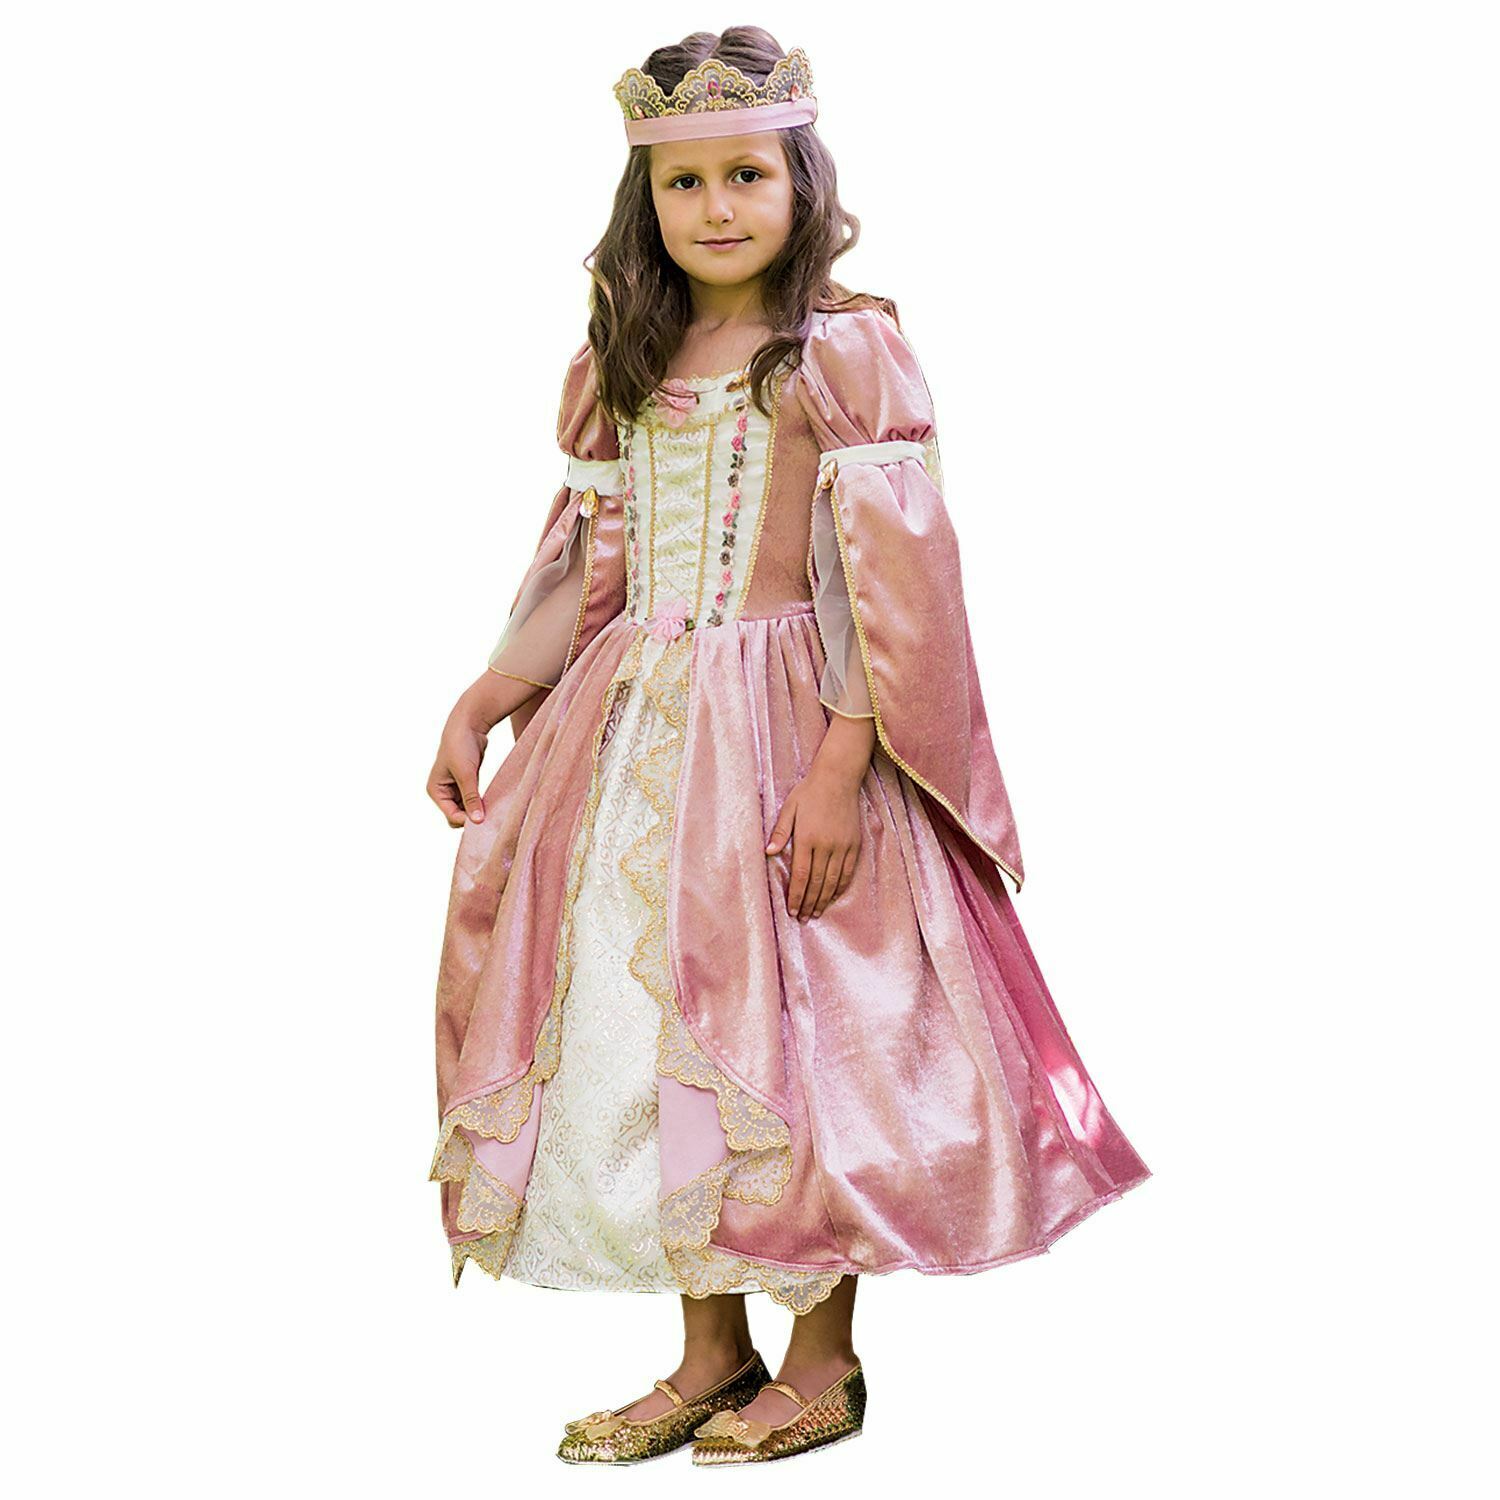 GIRLS DELUXE MEDIEVAL PINK PRINCESS COSTUME